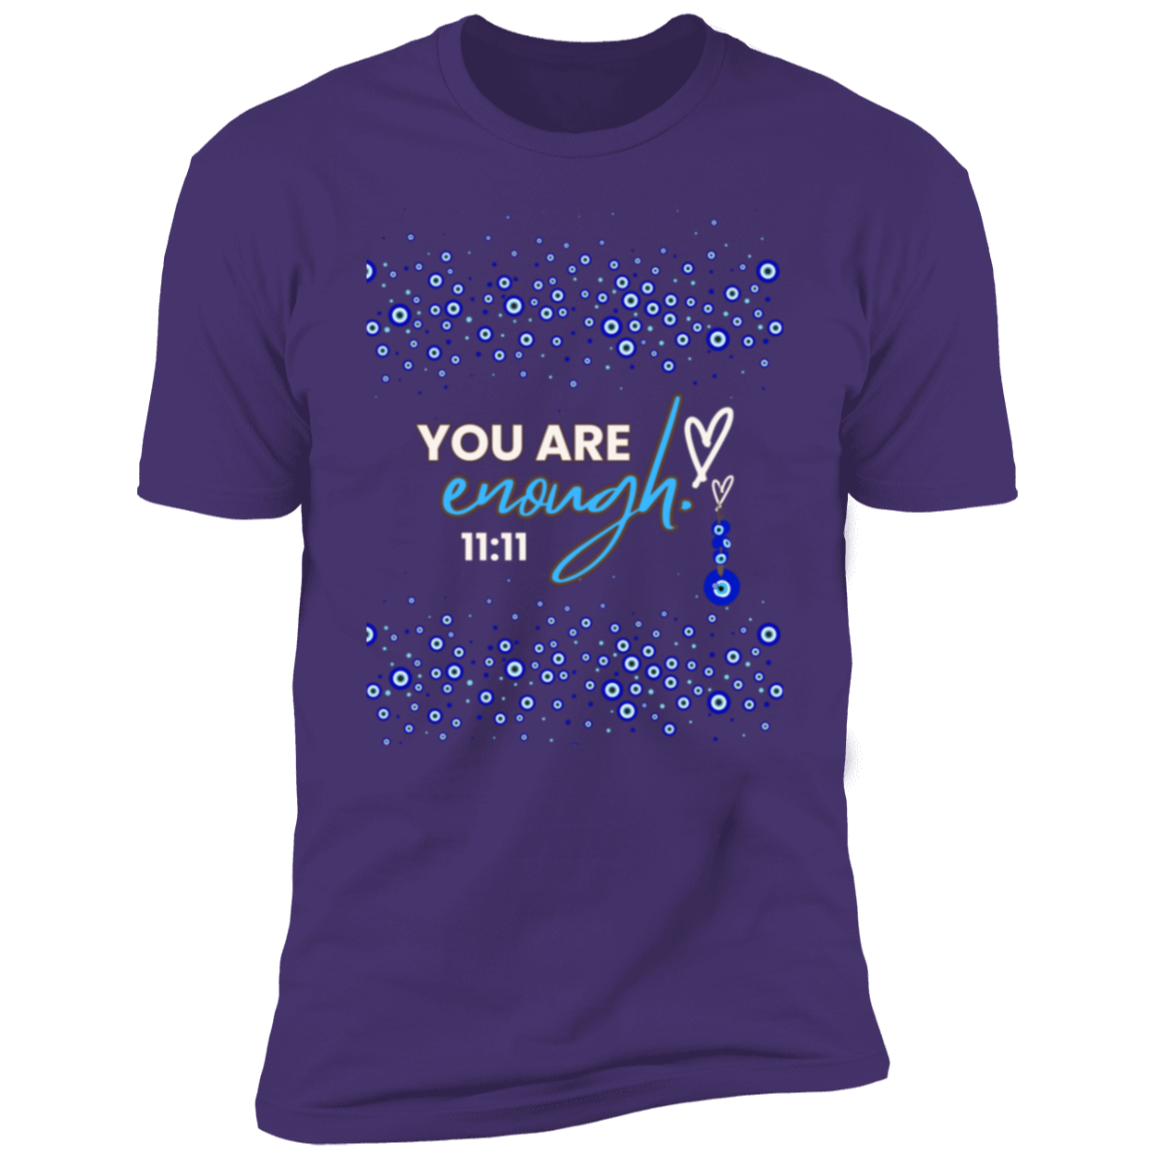 1111 You are enough! Premium Short Sleeve T-Shirt